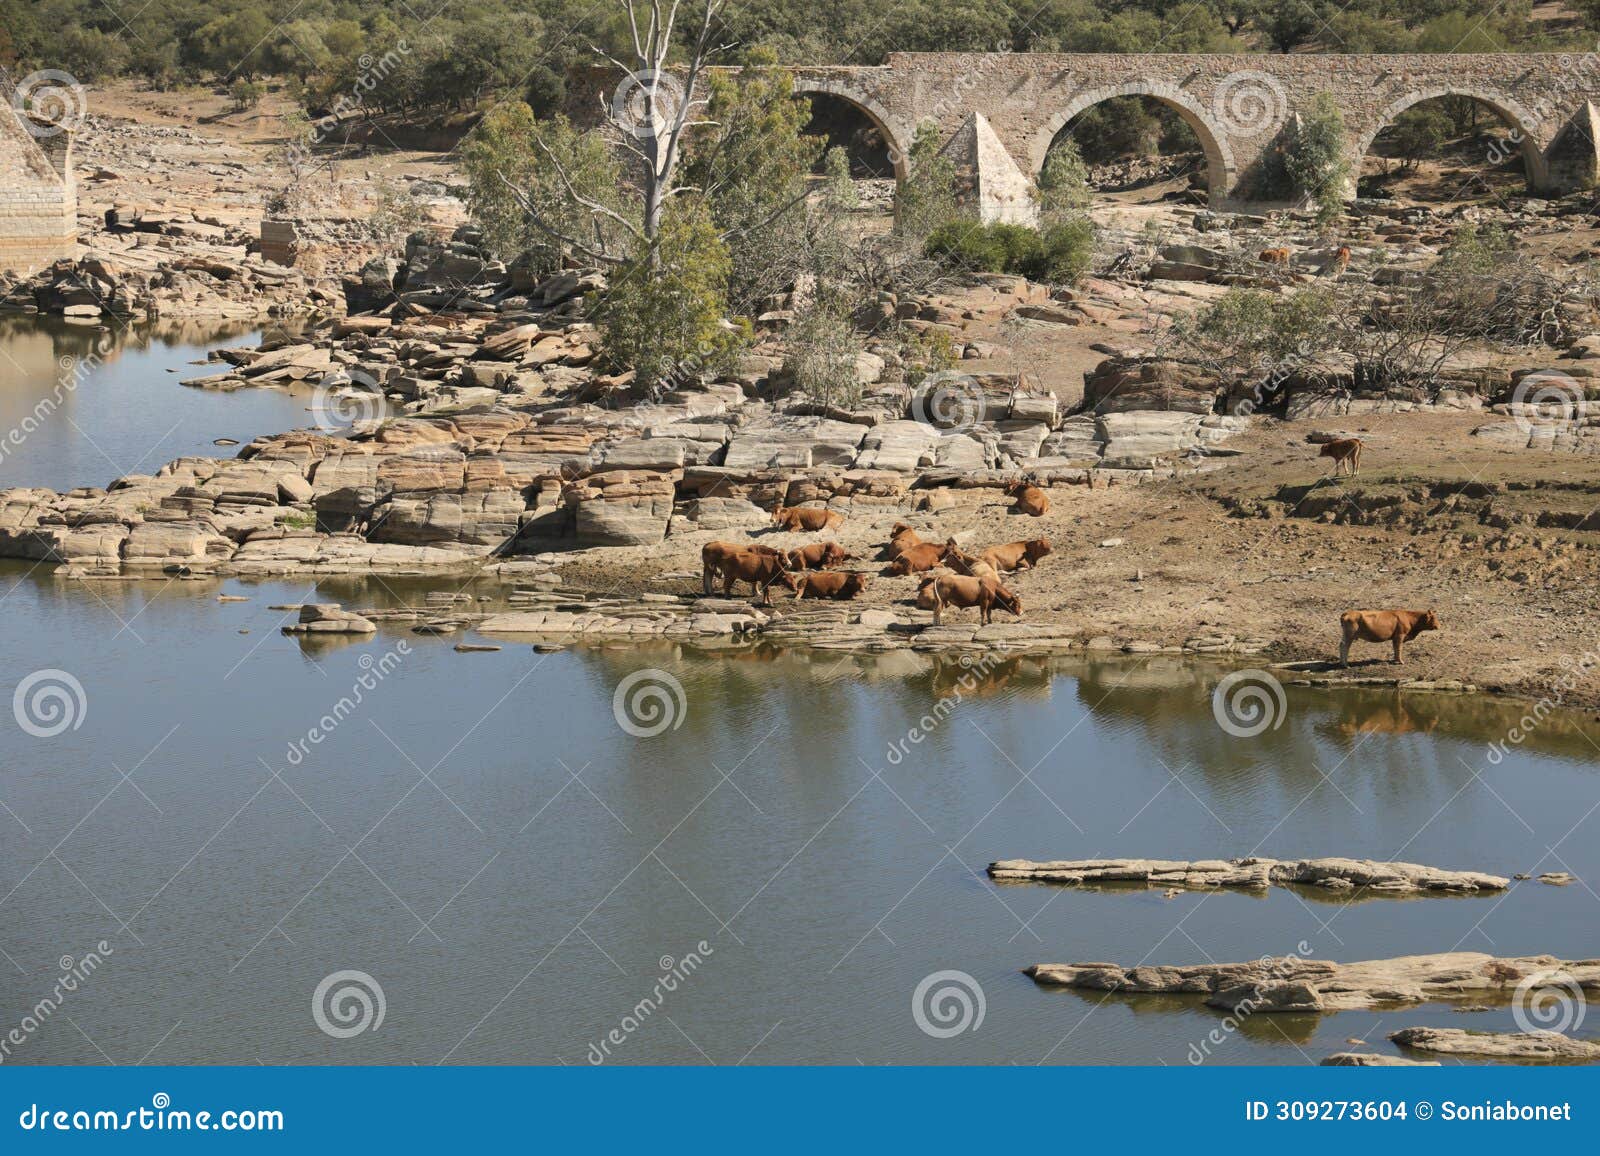 remains of the ajuda bridge over the guadiana river